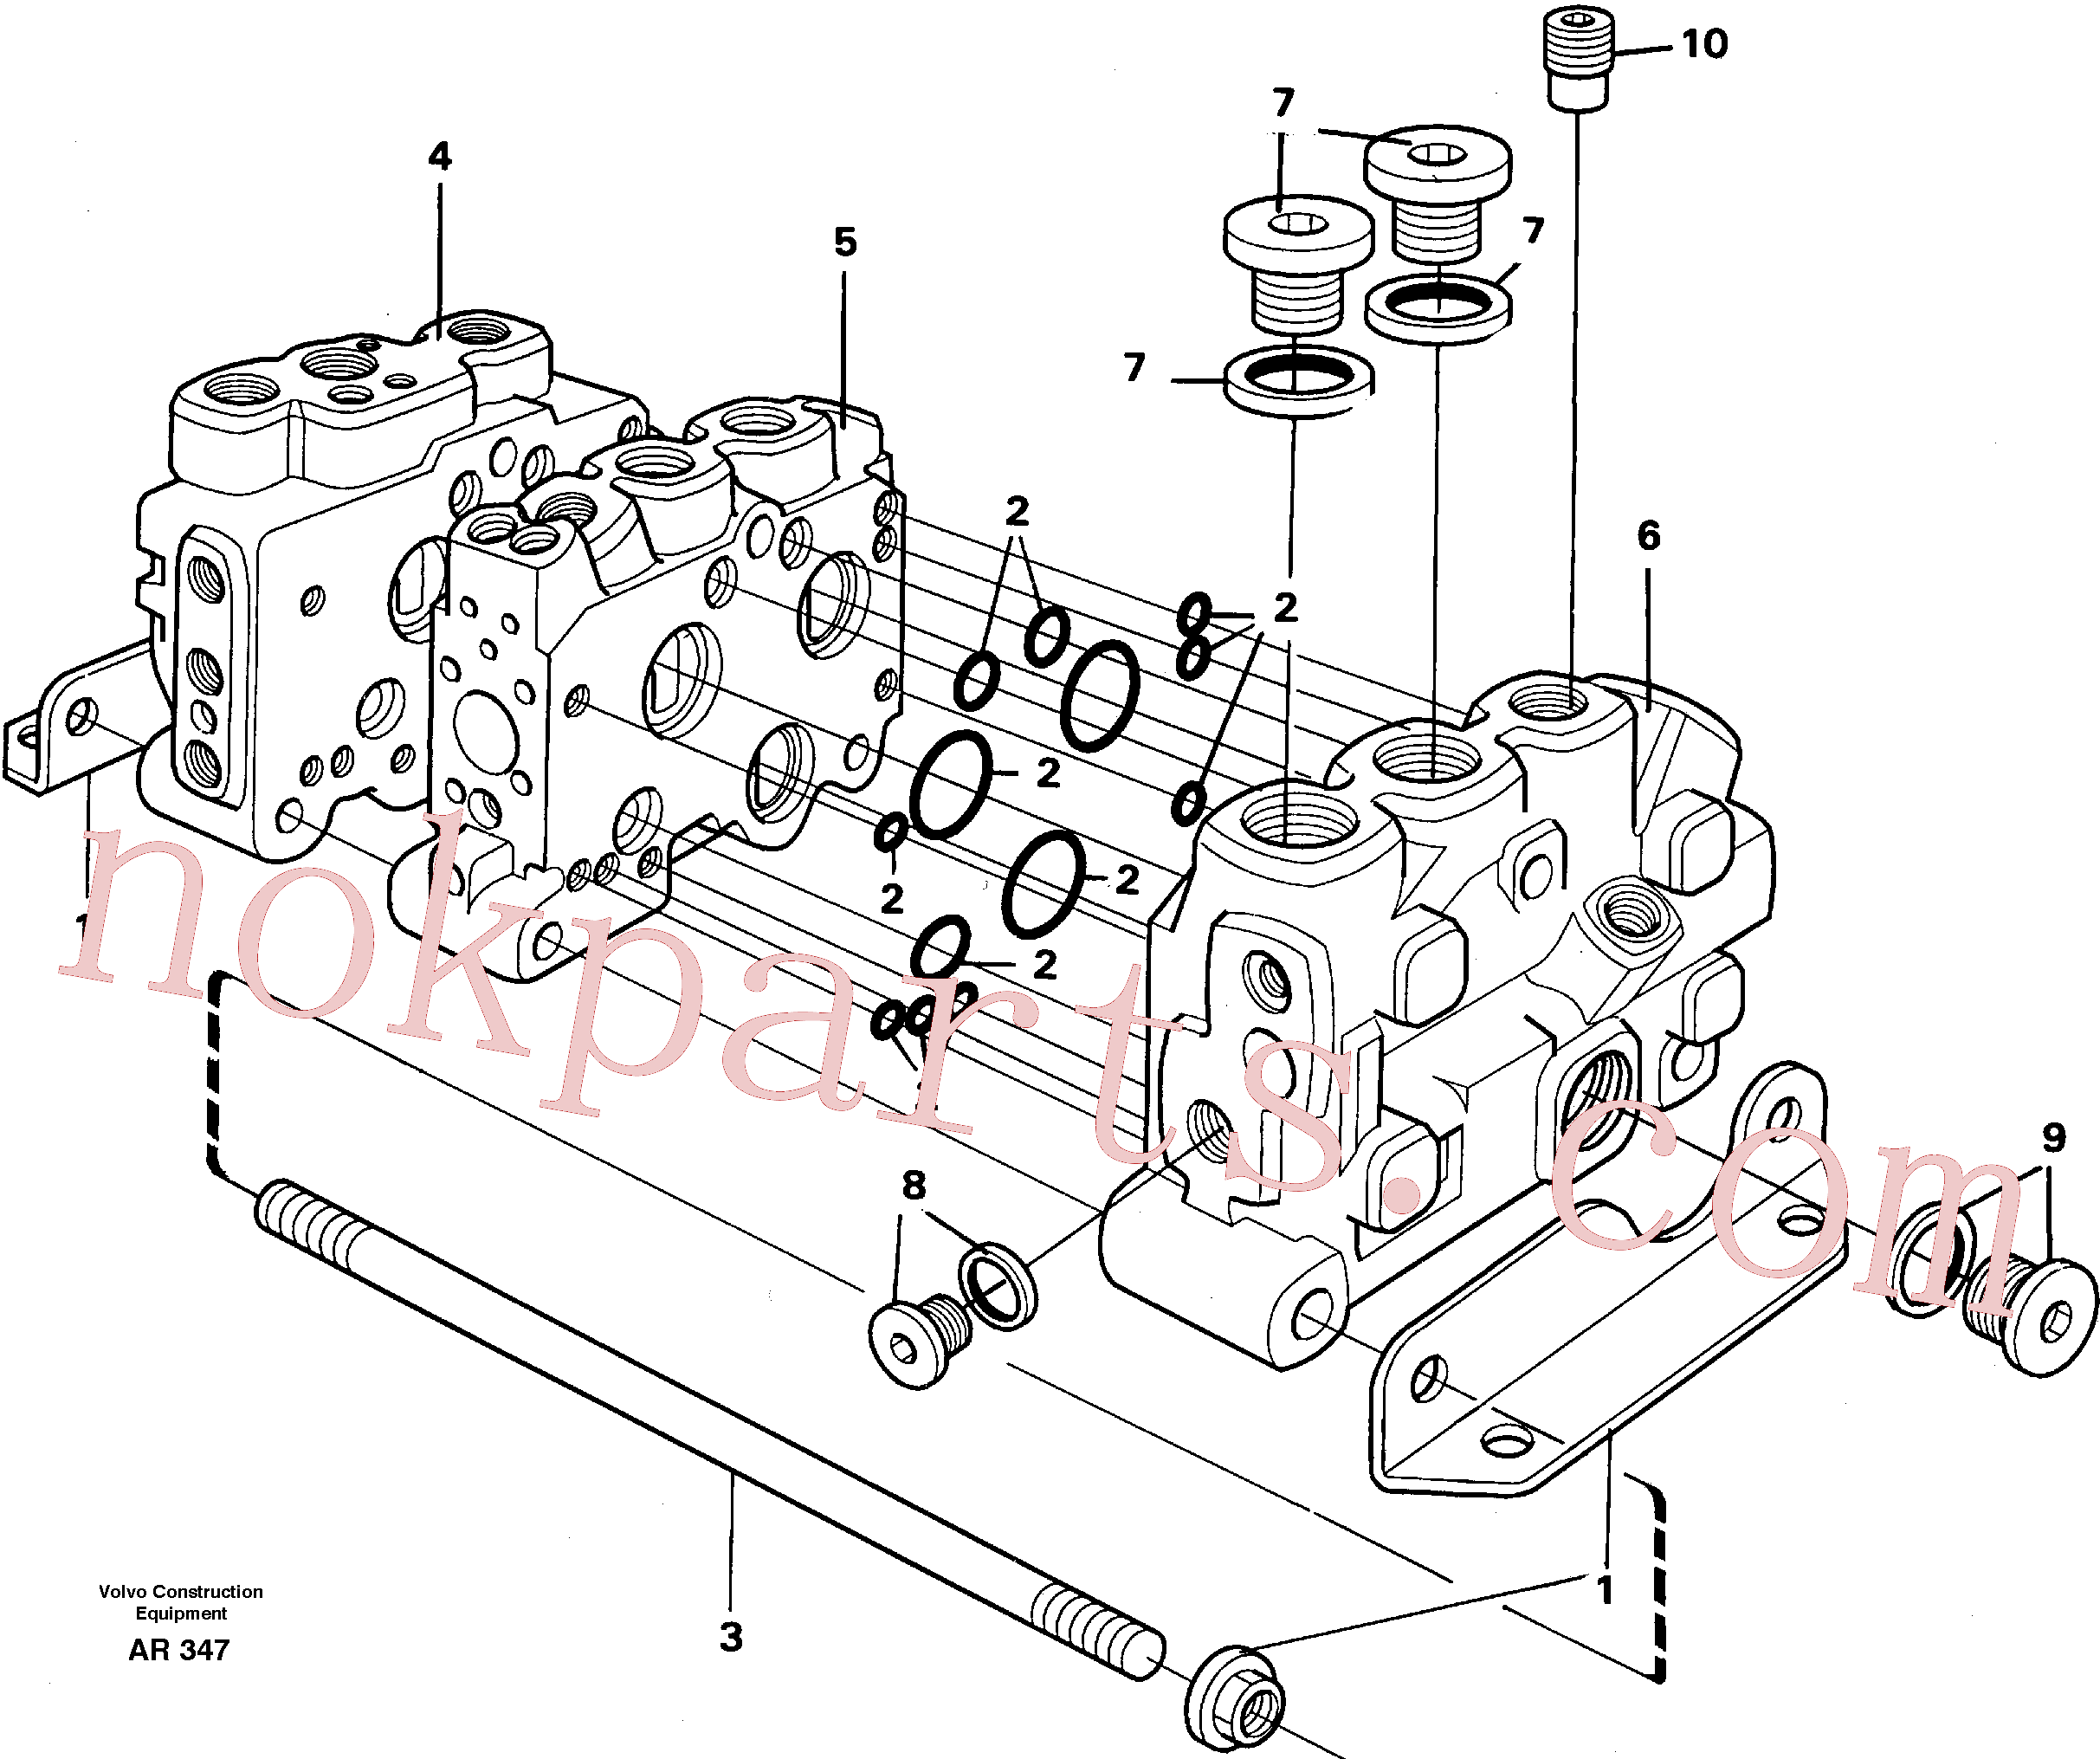 PJ7416644 for Volvo Valve section with assembly parts(AR347 assembly)